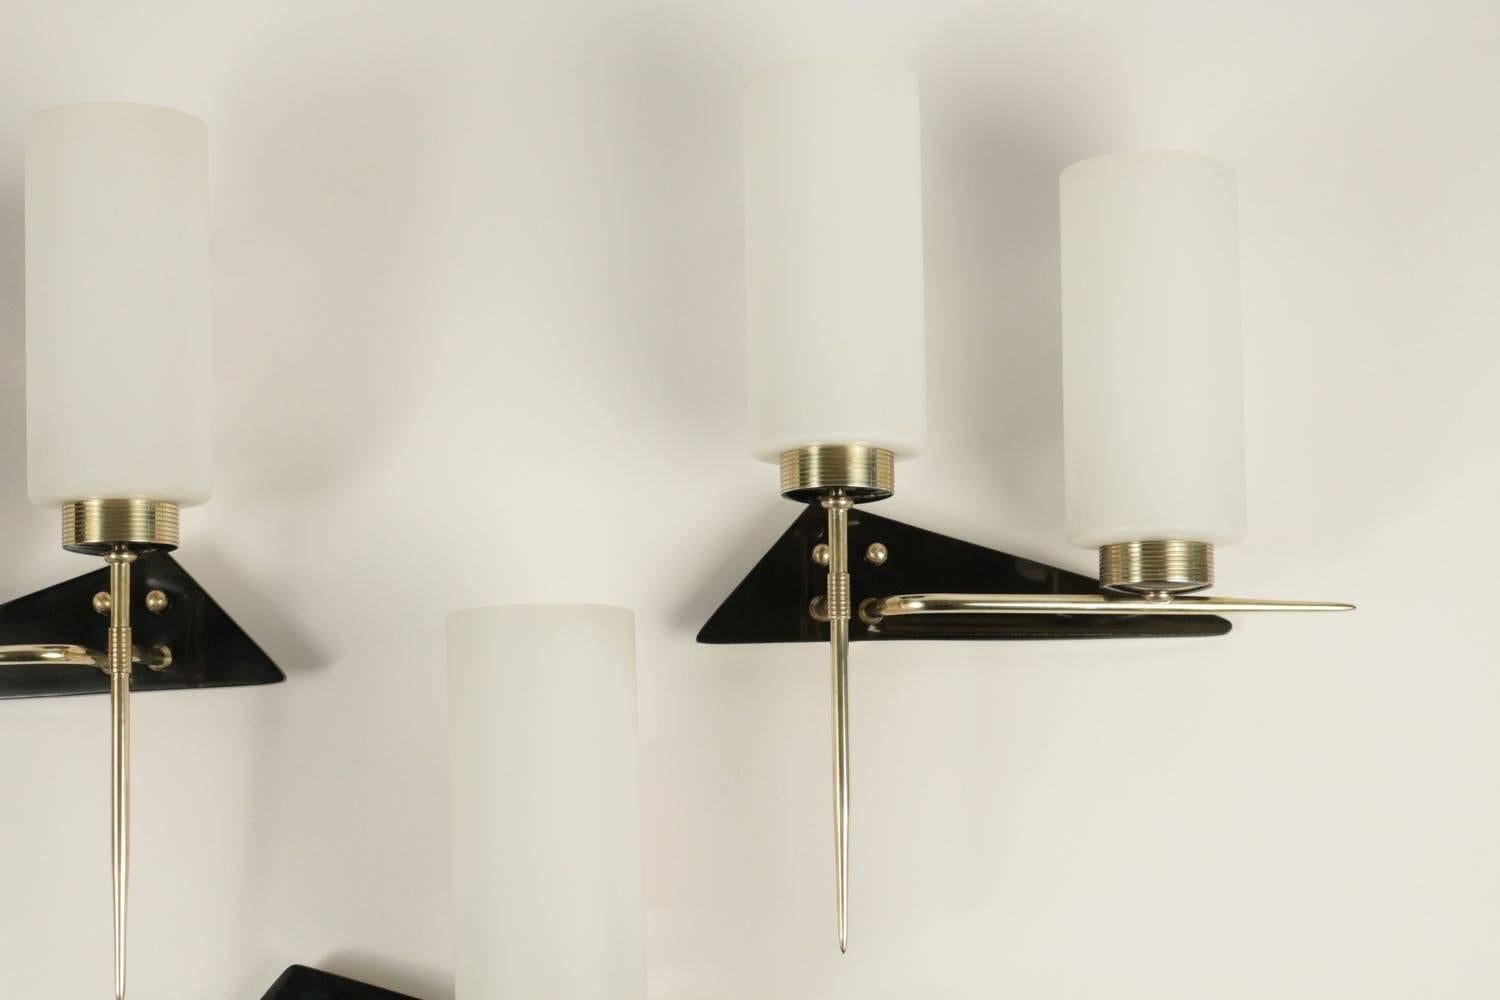 Set of three asymmetrical sconces, Maison Arlus, 1960.

The set is composed by a pair of double sconces and one simple sconce.

Each sconce consists of a triangular shaped backplate made of black lacquer, decorated with brass balls.
The arms